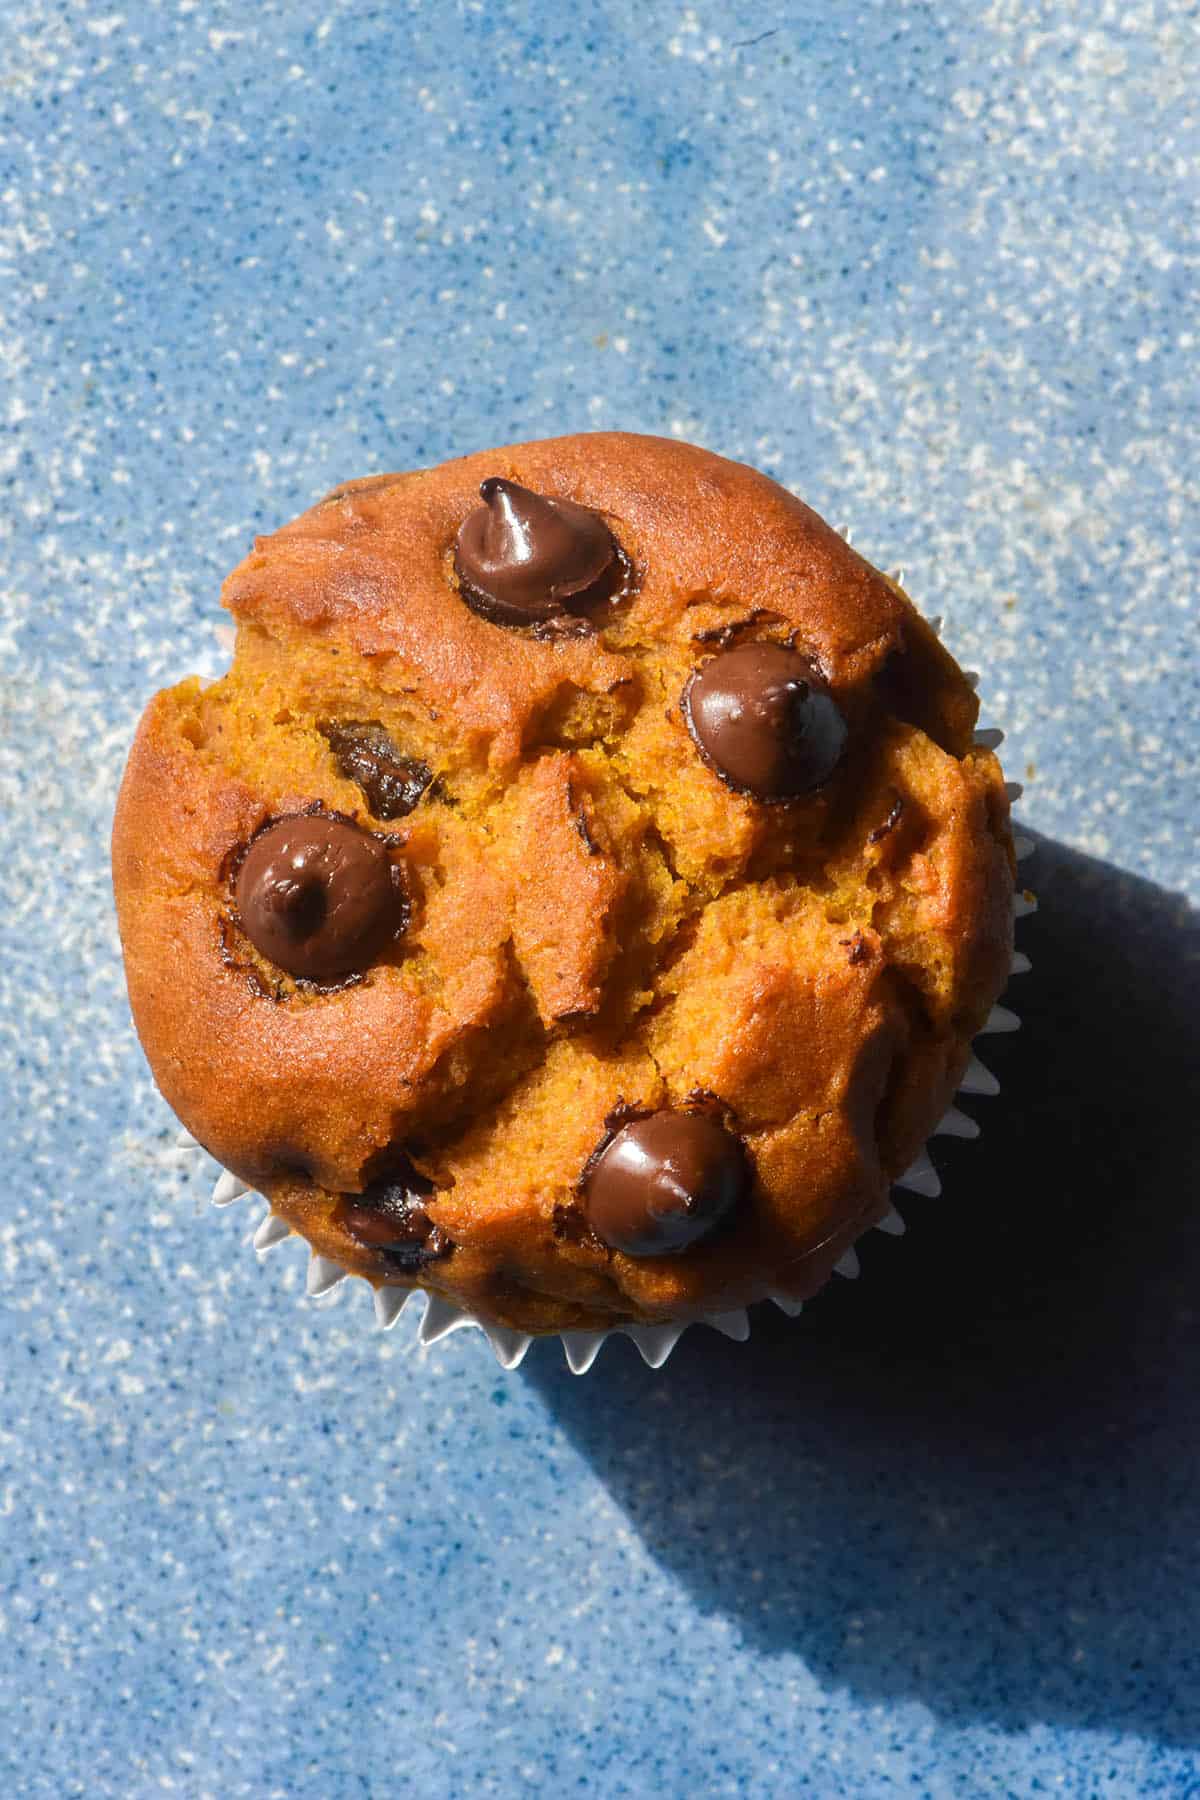 A brightly lit aerial image of a gluten free pumpkin choc chip muffin on a sky blue ceramic plate